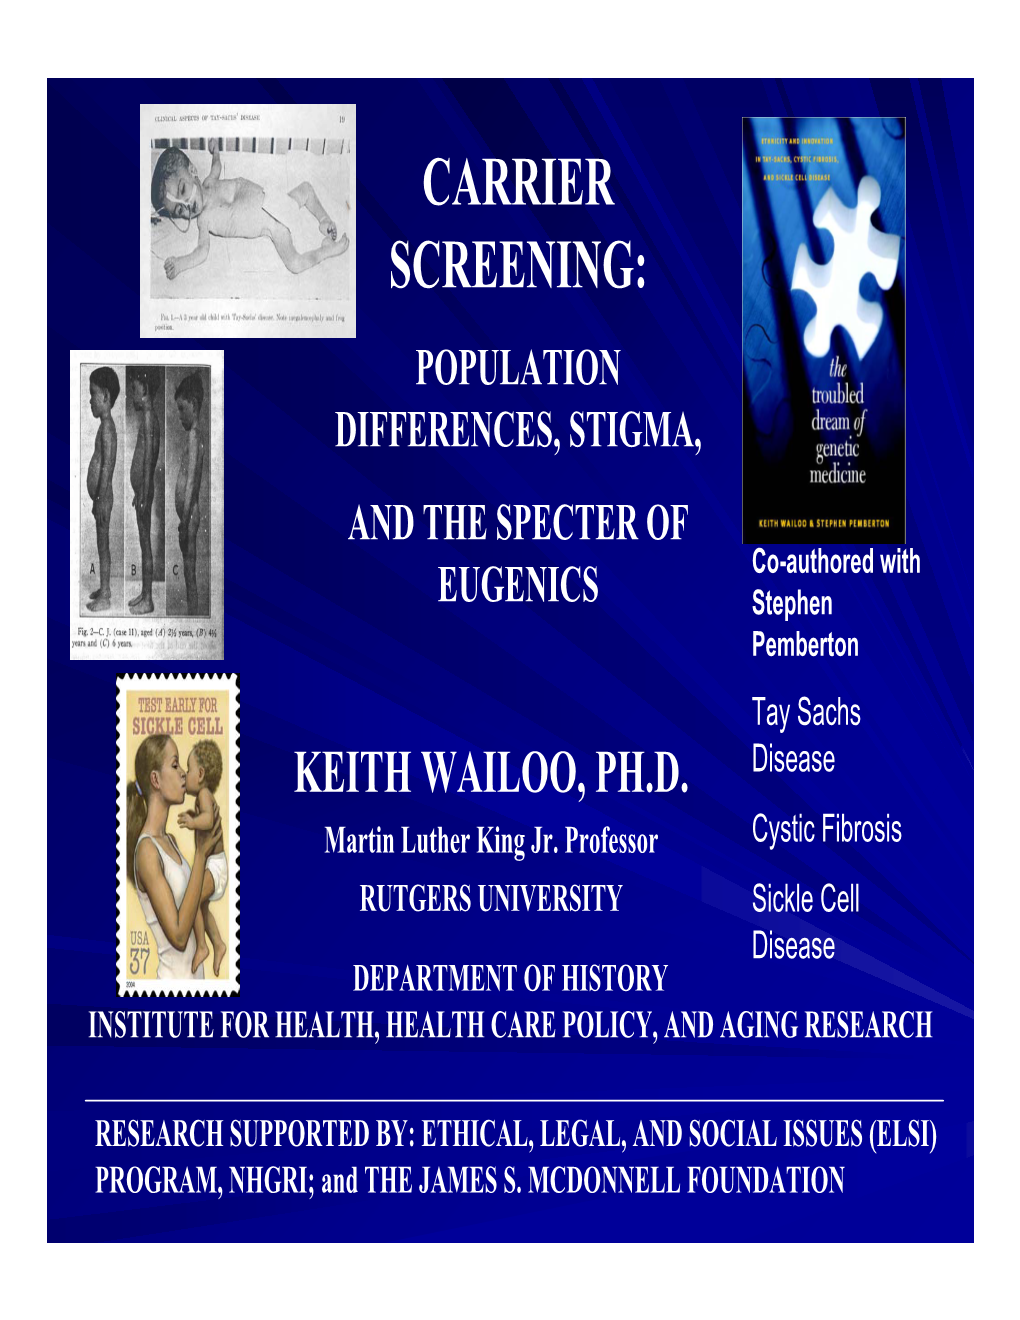 CARRIER SCREENING: POPULATION DIFFERENCES, STIGMA, and the SPECTER of Co-Authored with EUGENICS Stephen Pemberton Tay Sachs KEITH WAILOO, PH.D